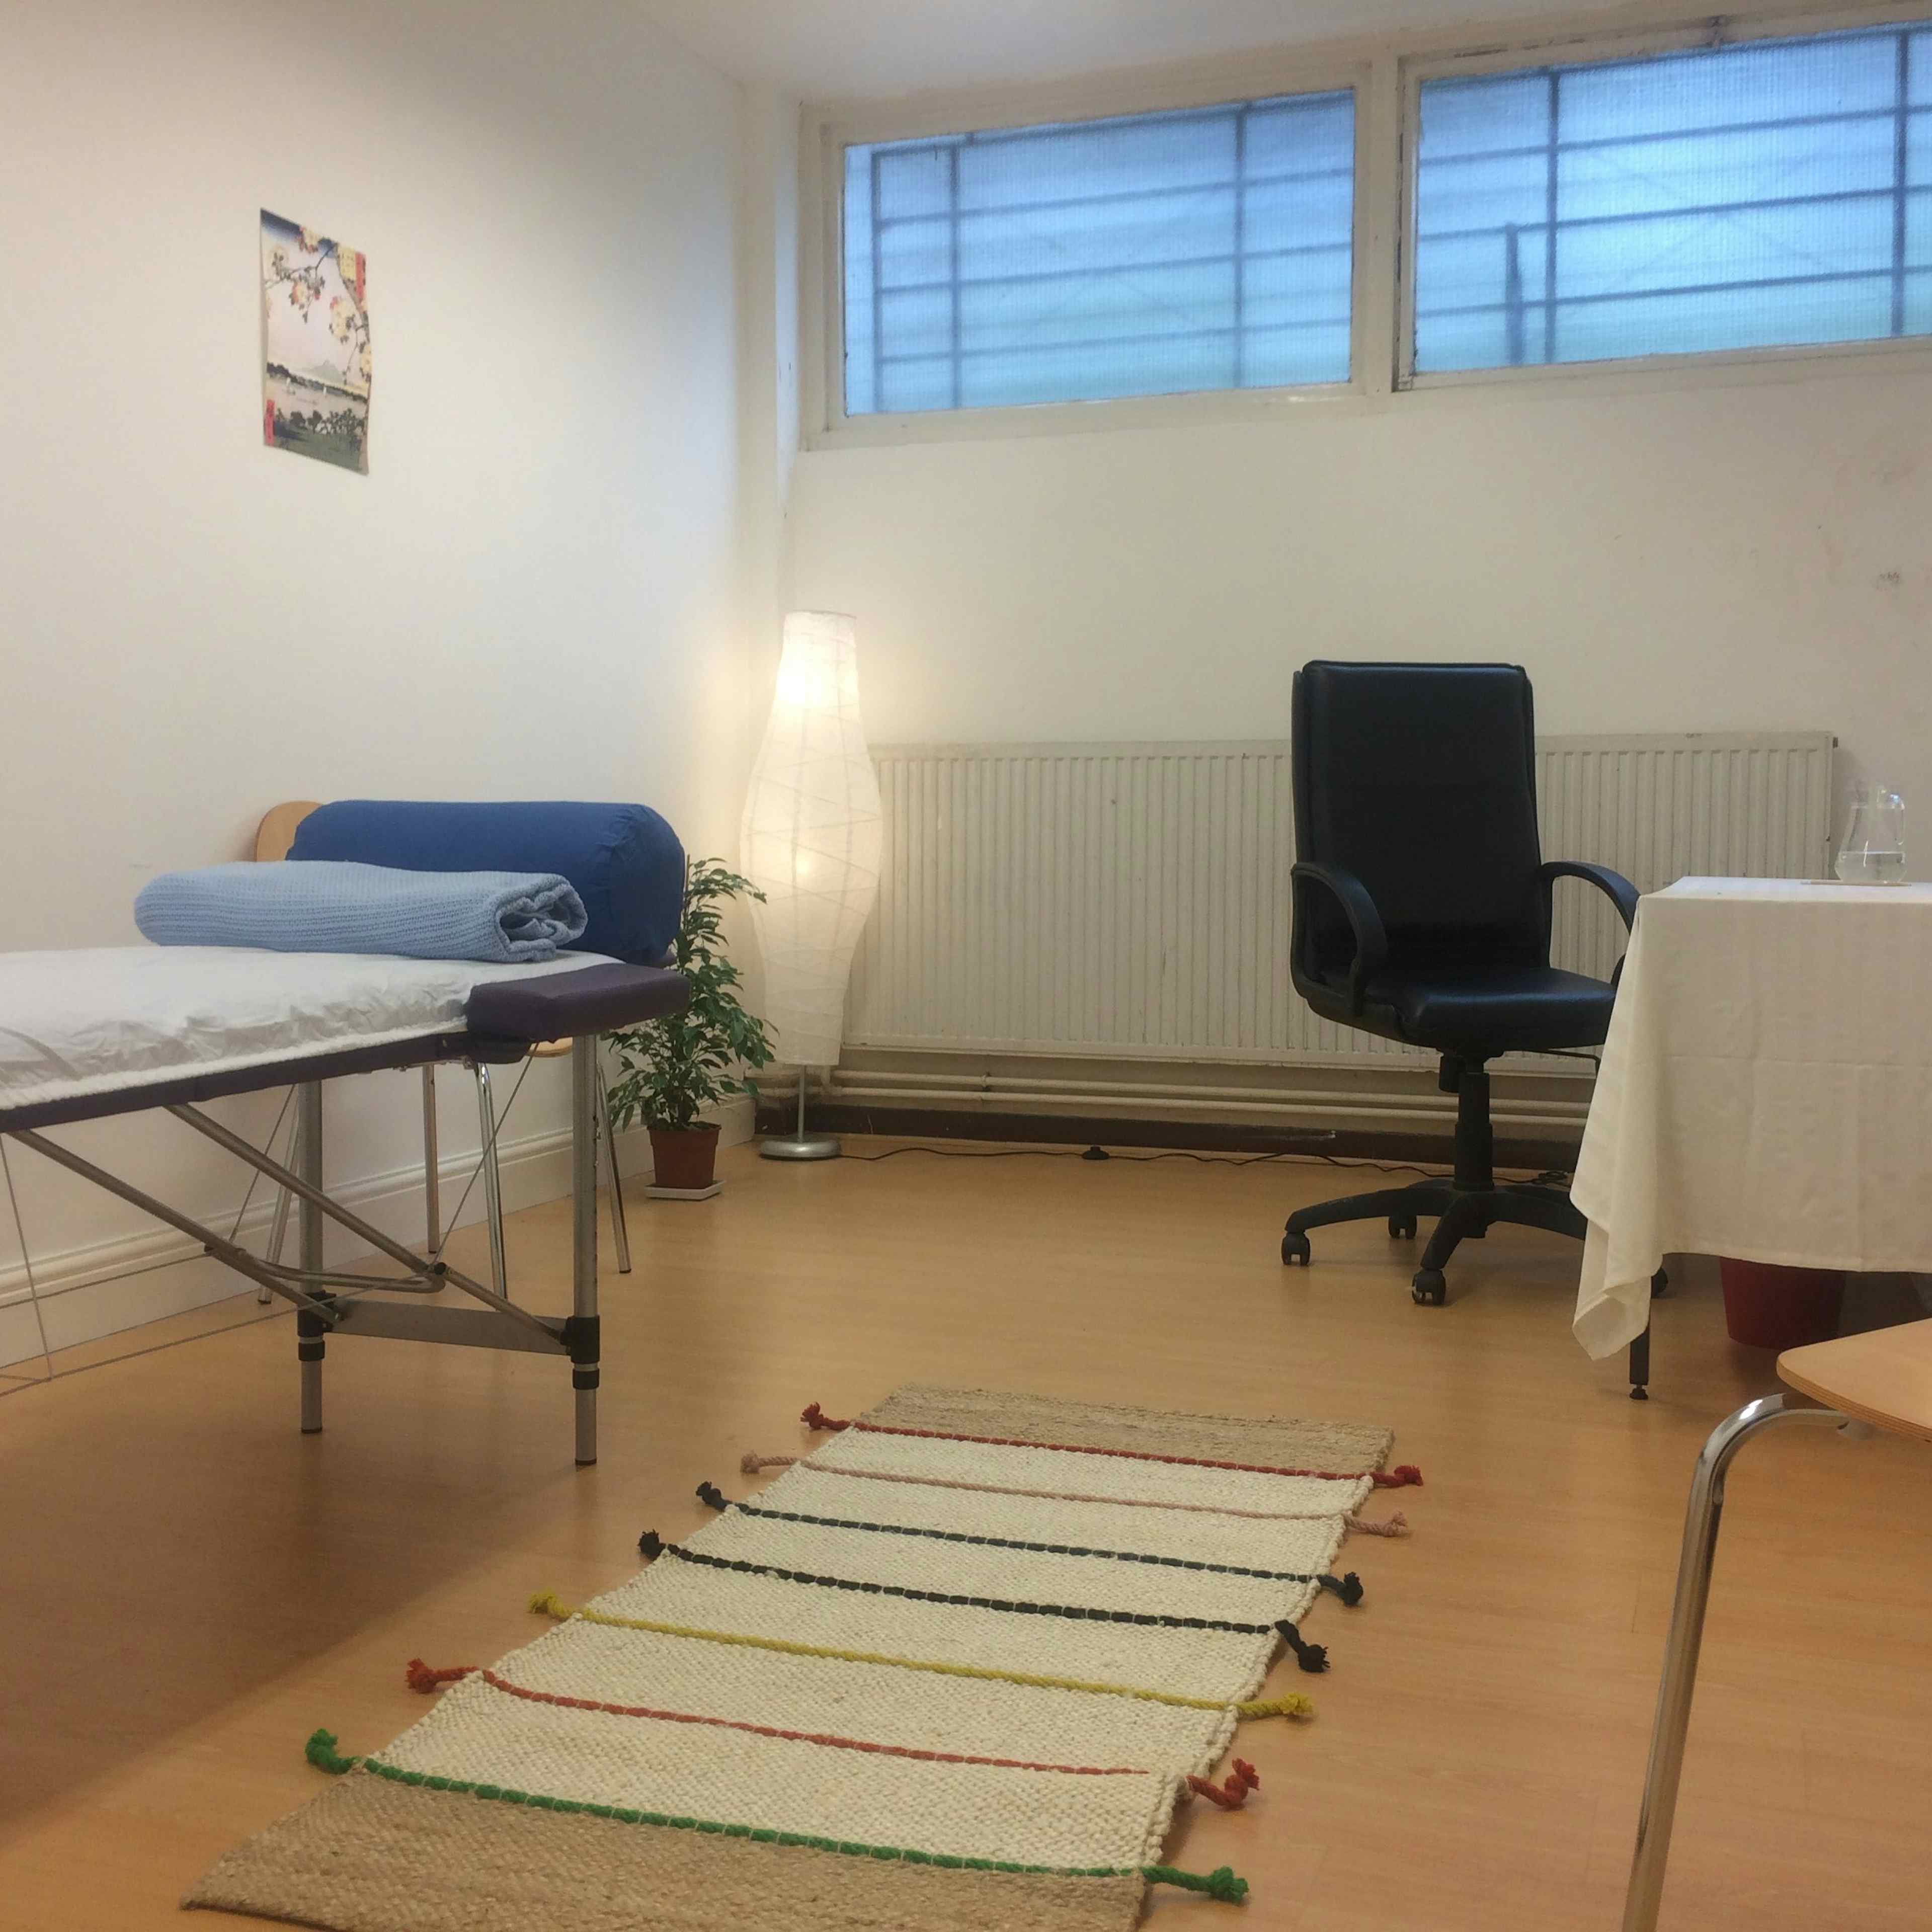 Centre 151 - Therapy Room image 1